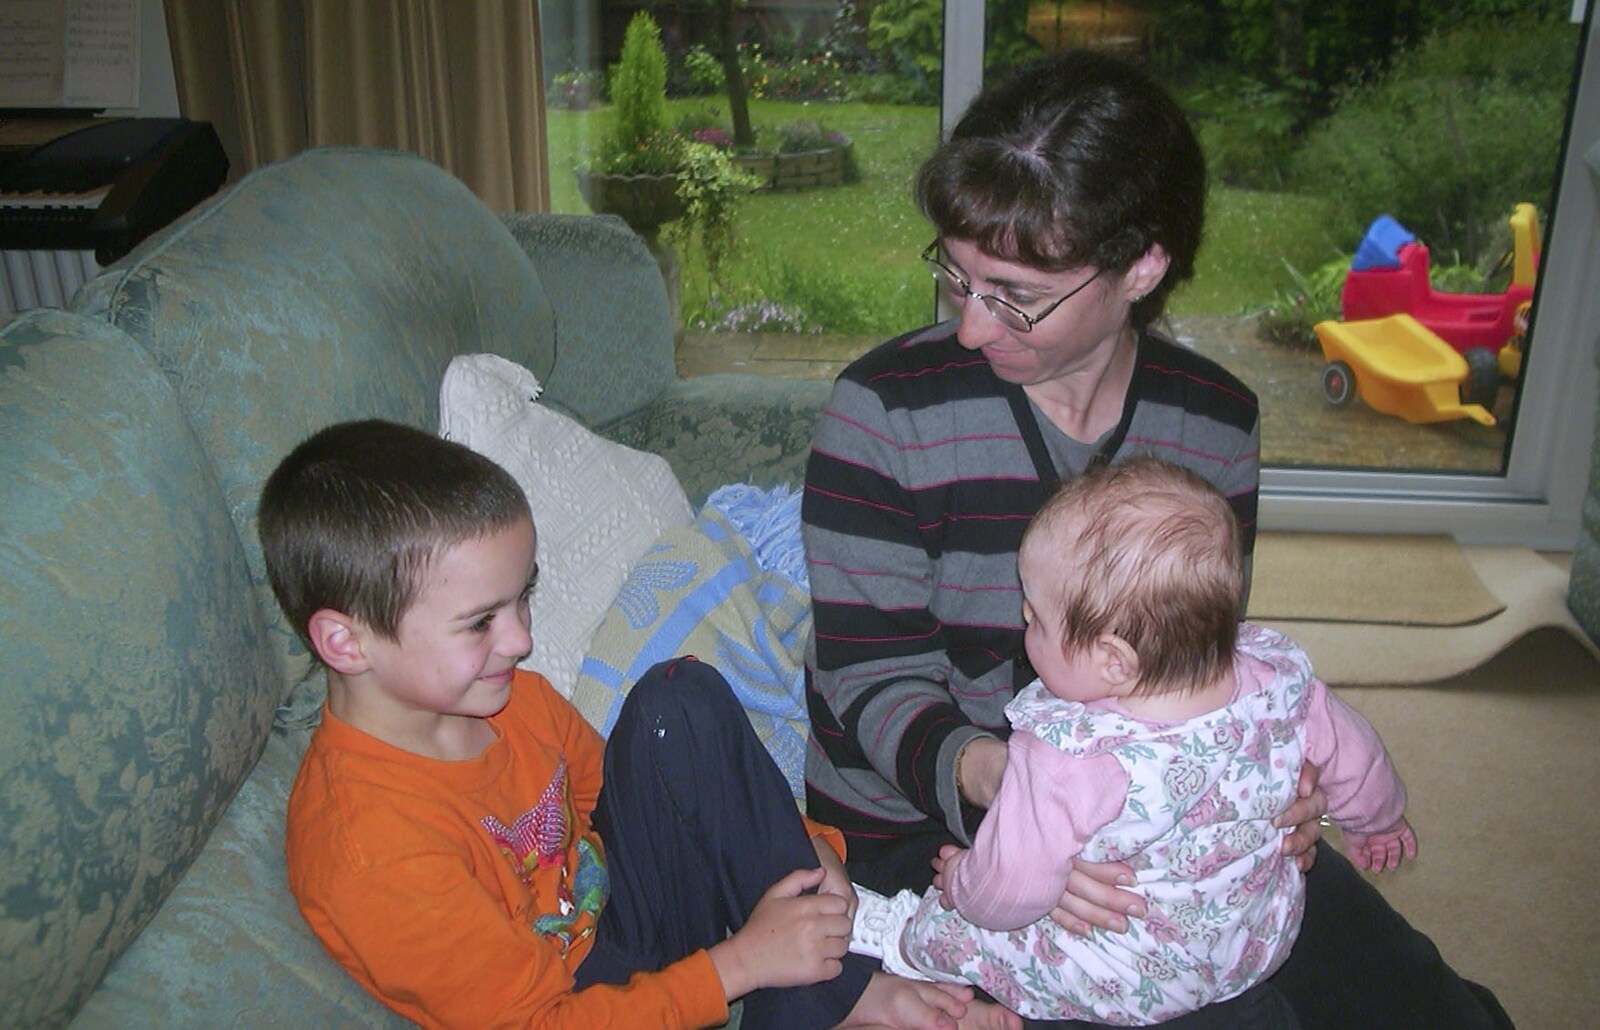 Sydney gets some more interaction from Sean's New Sprog, New Milton and Hordle, Hampshire - 12th September 2001